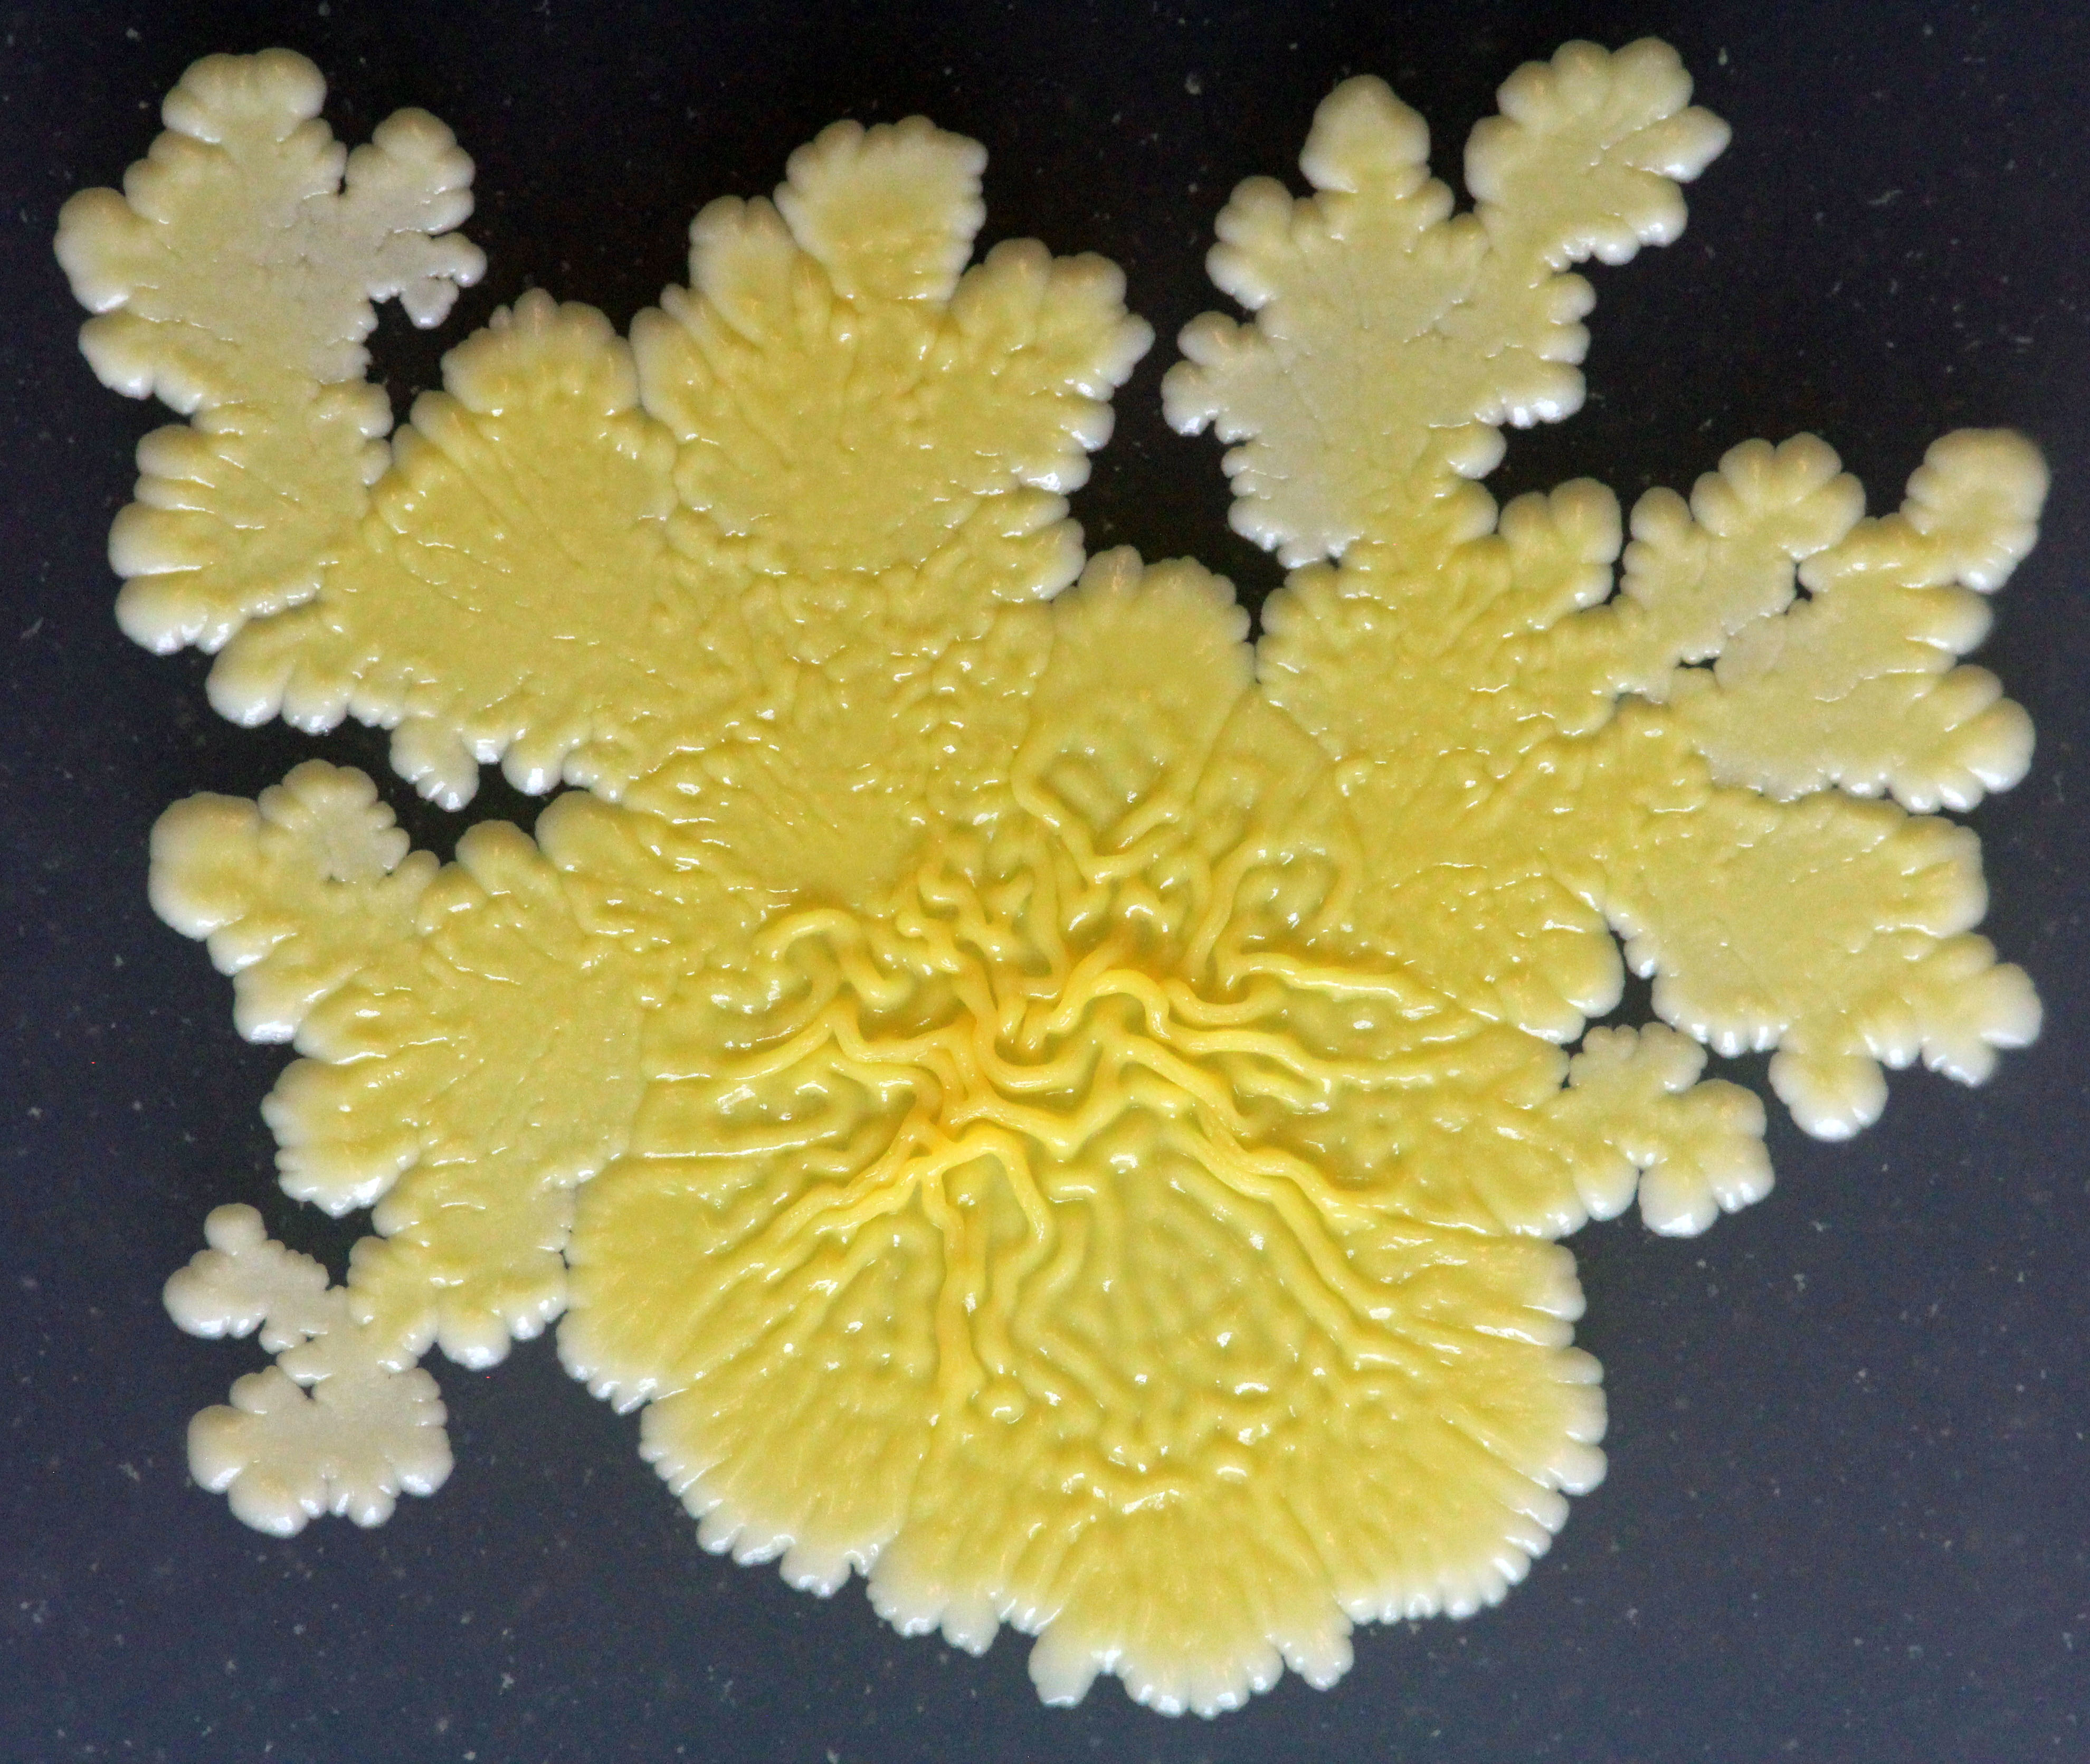 This crazy looking colony is the bacterium Staphylococcus xylosus. This coagulase-negative Staph species is commonly found on fermented dairy and meat products. The wild patterns forming at the edge of the colony are a common trait of Staph and we think play important roles in how this bacterium moves through microbial communities. 